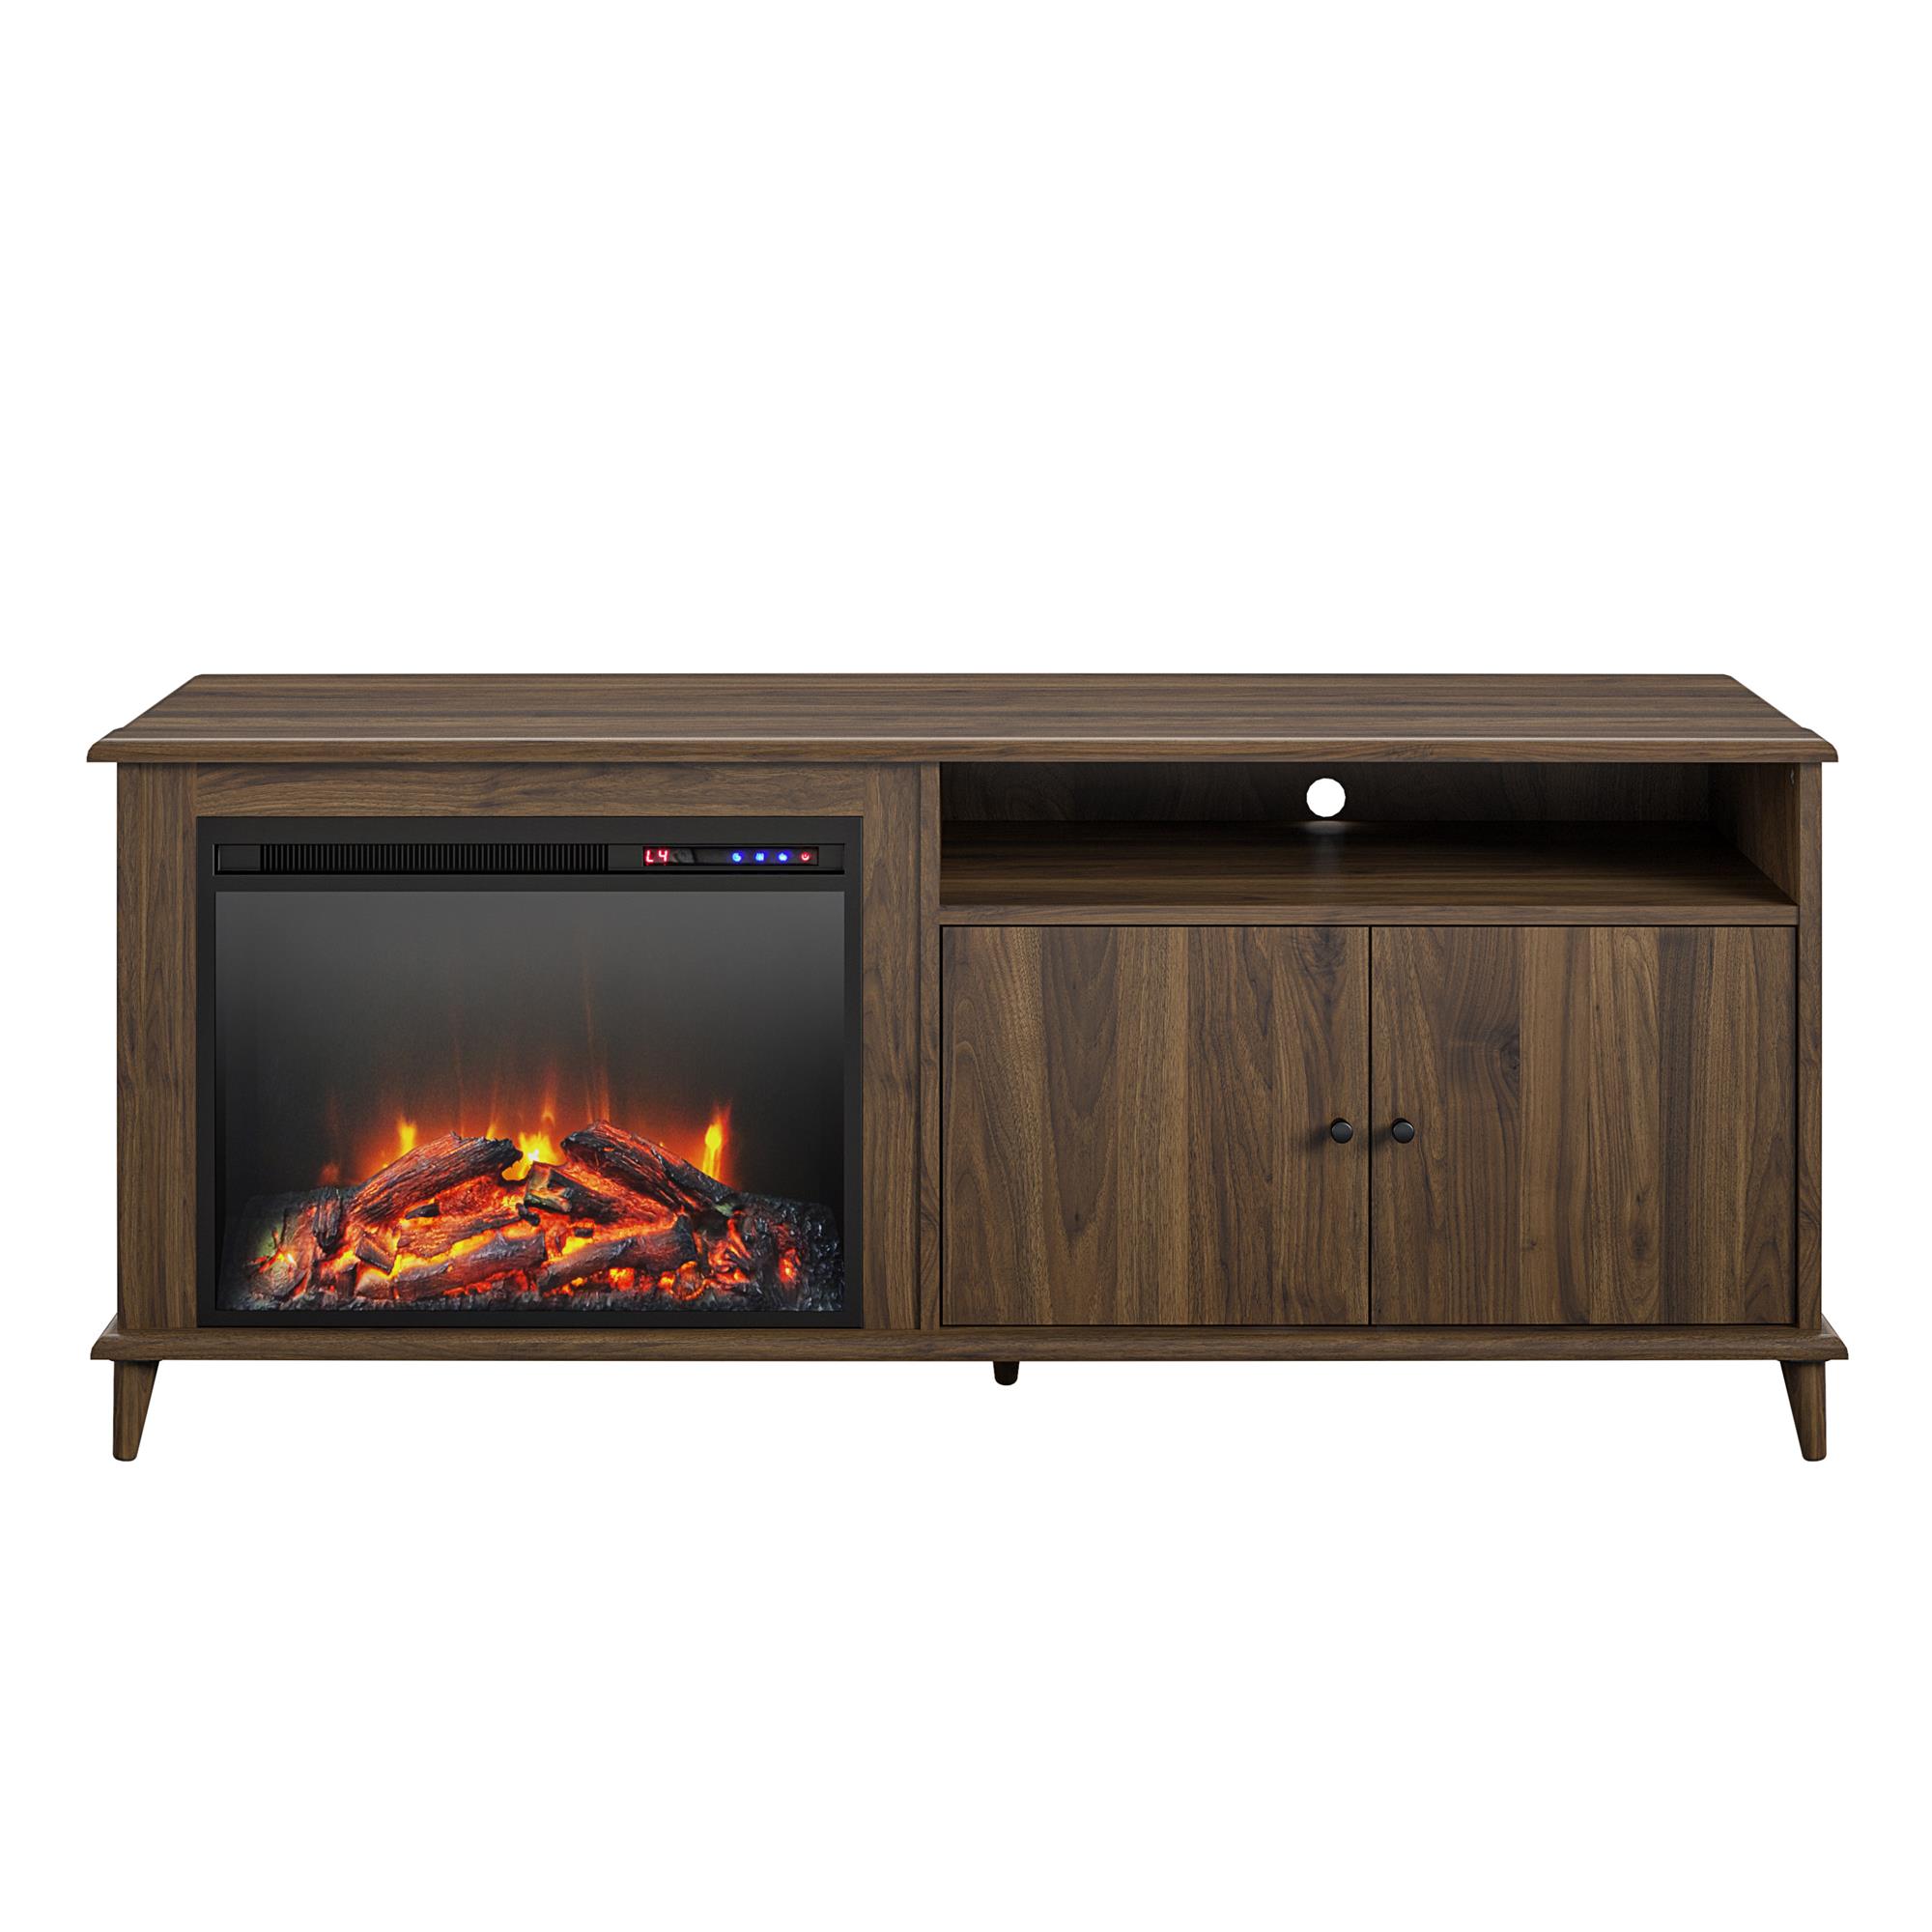 Ameriwood Home Farnsworth Fireplace TV Stand for TVs up to 65", Walnut - image 4 of 11